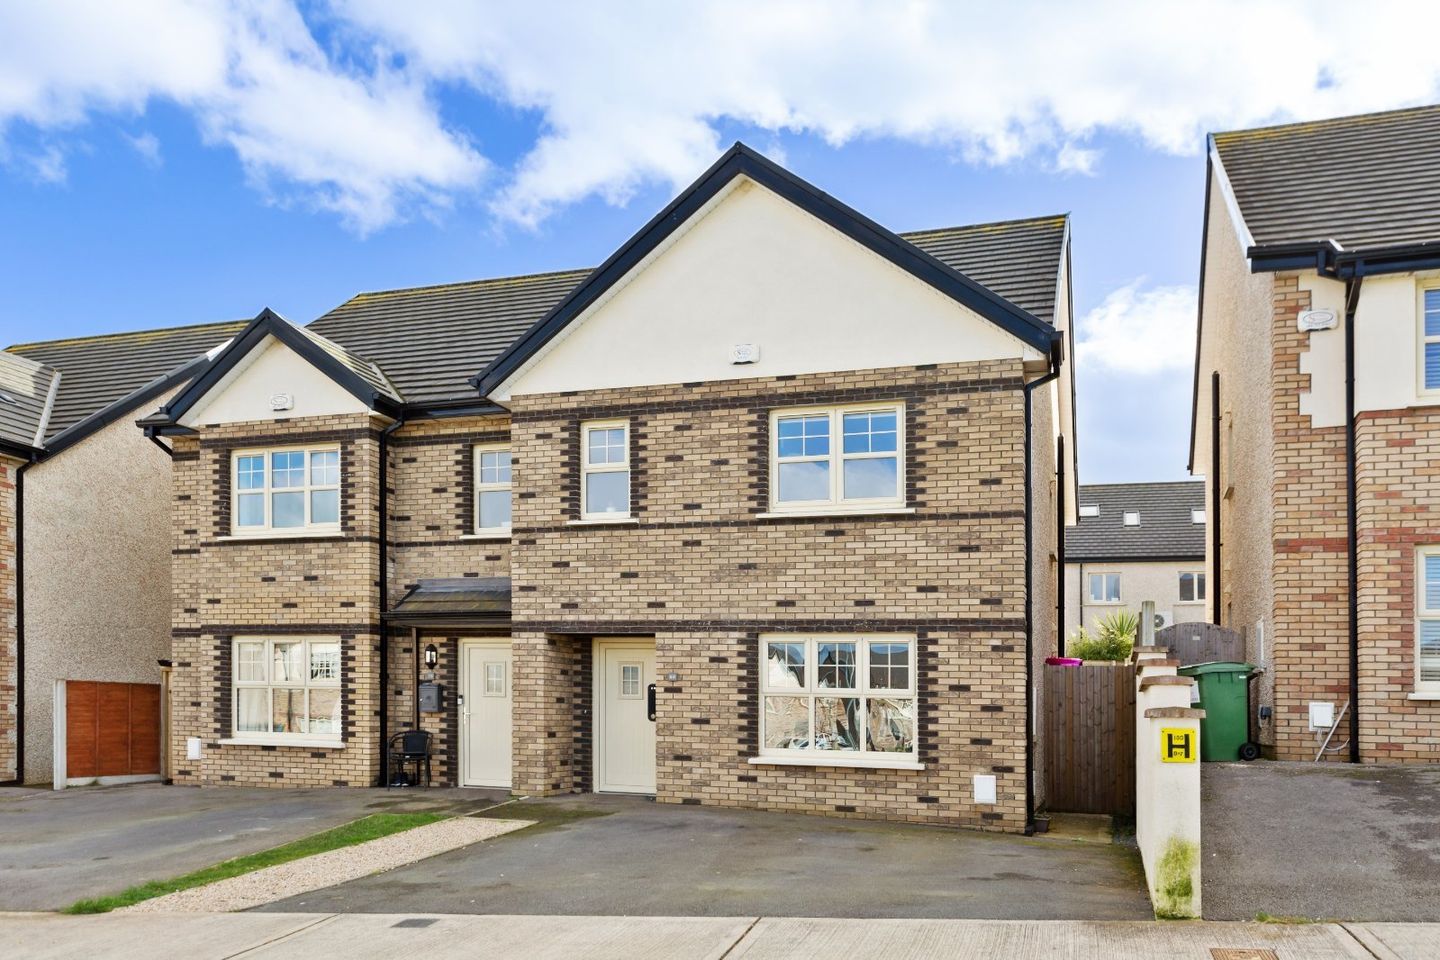 80 Kirvin Hill, Broomhall, Rathnew, Co. Wicklow, A67FW59